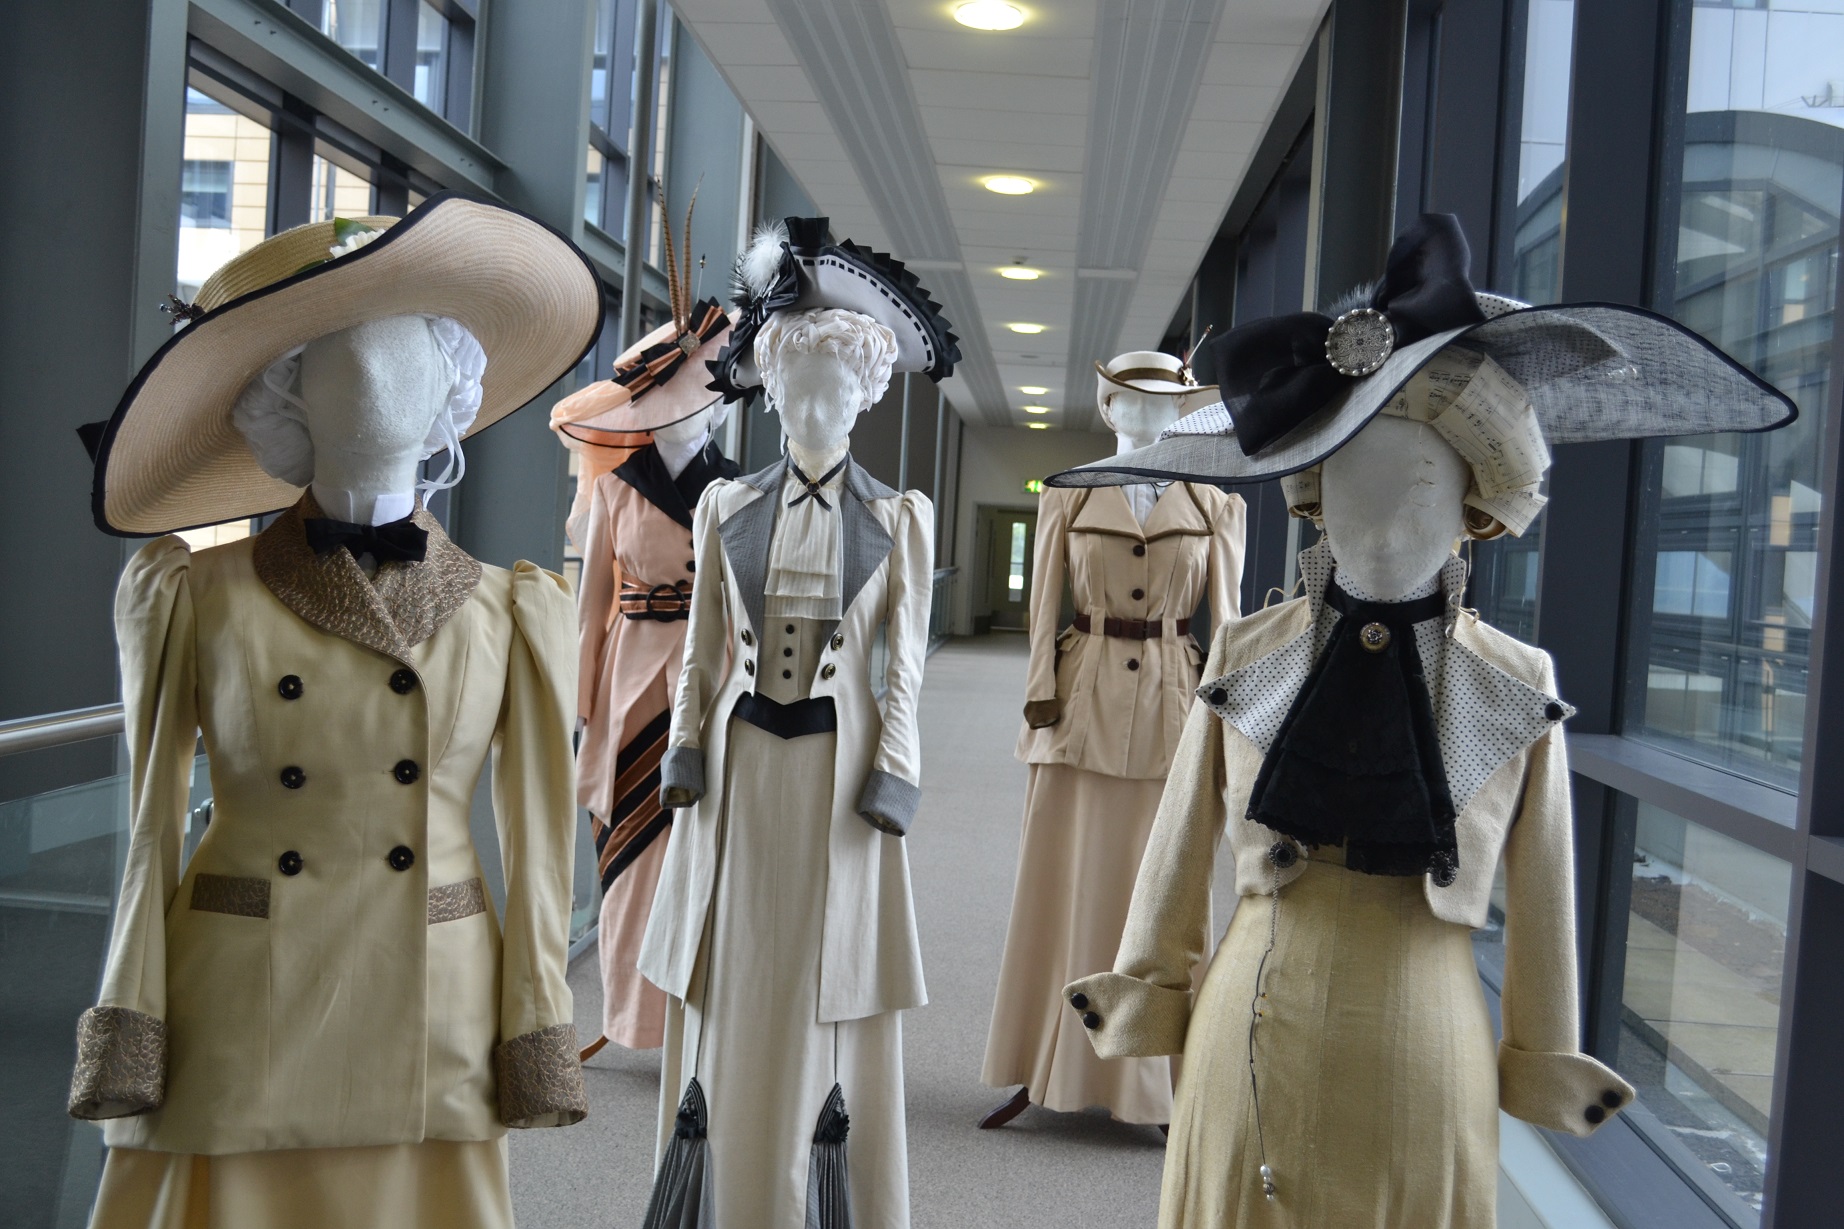 Costume for Stage and Screen students bring Edwardian style to Festival Theatre